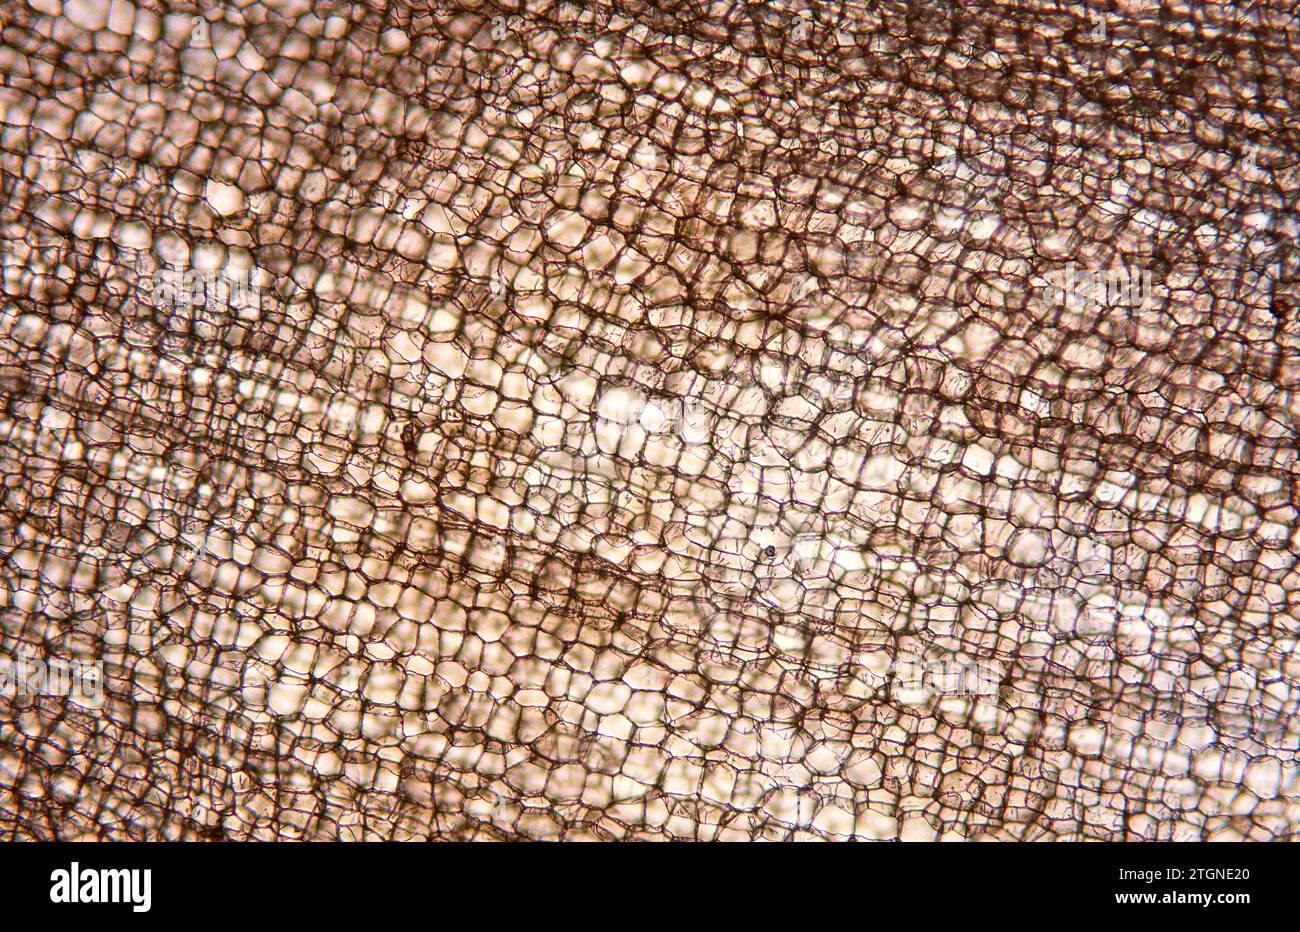 Cork or phellem layer is a protective plant tissue composed by dead cells covers of suberine. Quercus suber bark photomicrograph. Stock Photo